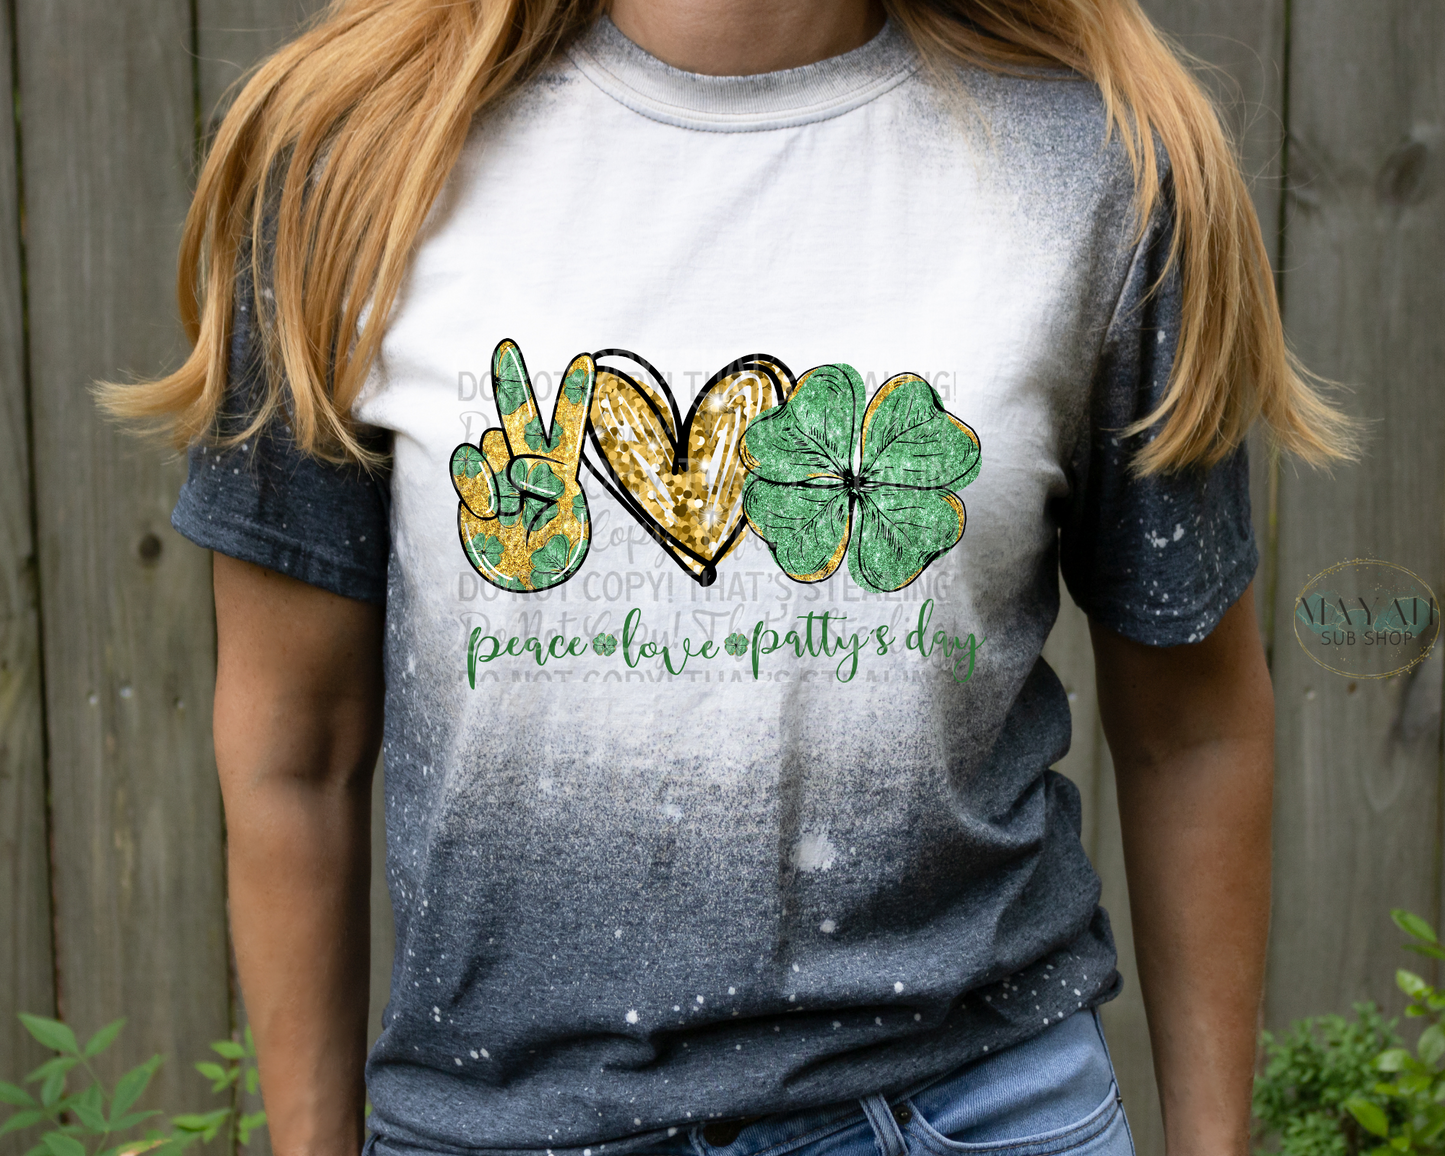 Peace love St. patty's day bleached tee. - Mayan Sub Shop